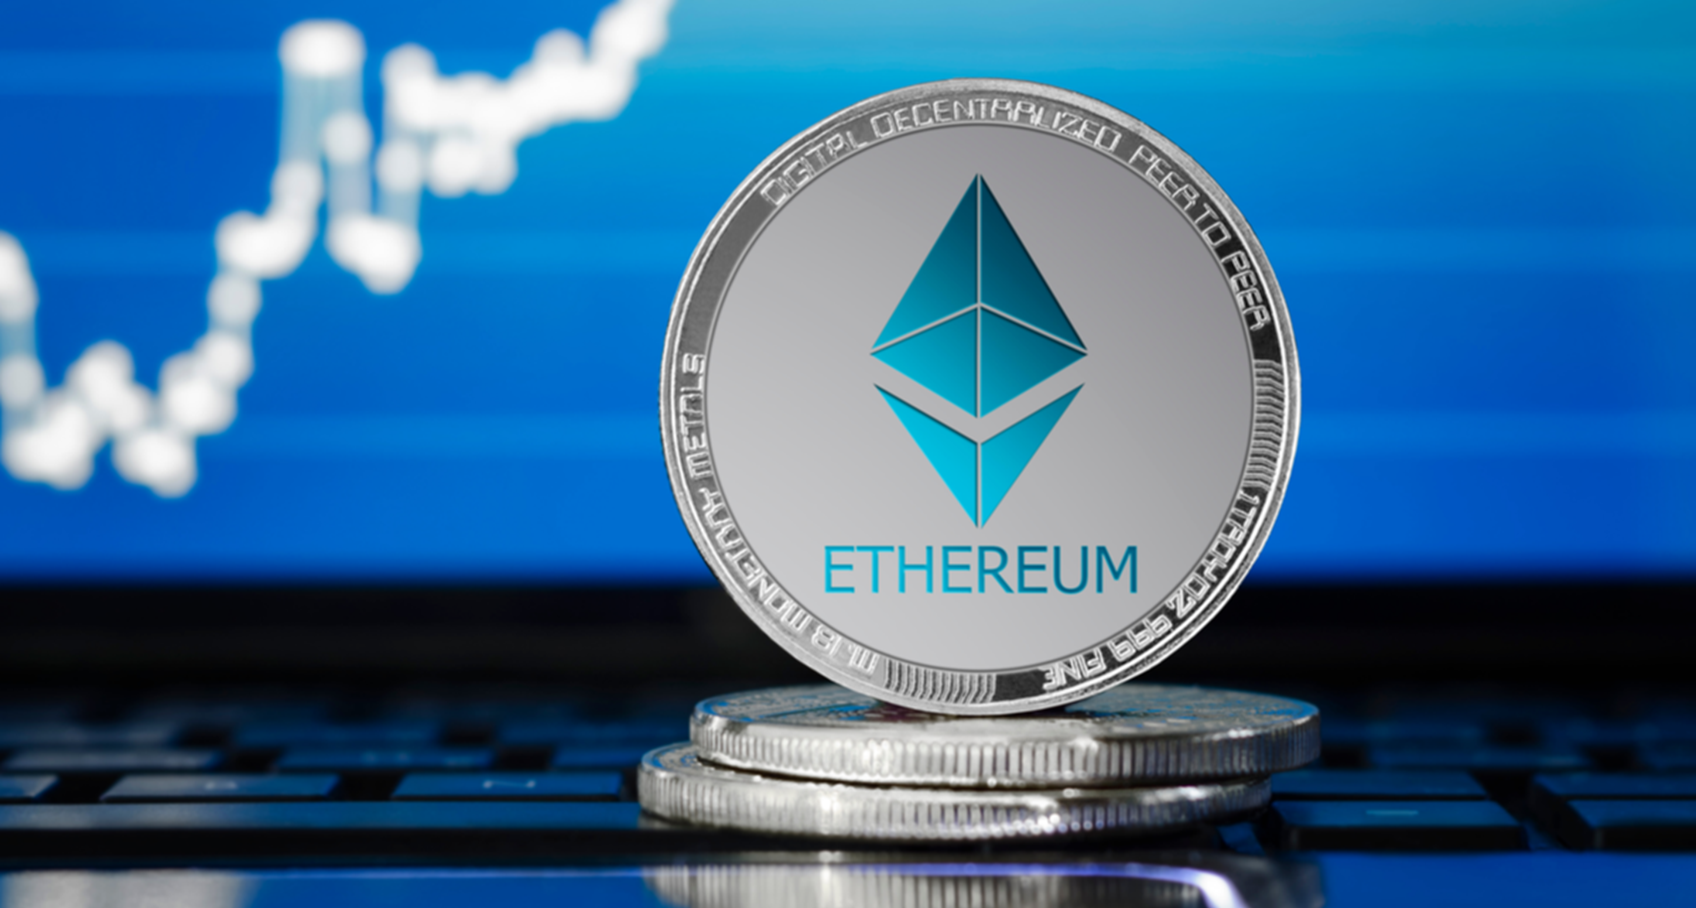 A physical ethereum crypto coin featuring the ethereum logo sits against a blue background